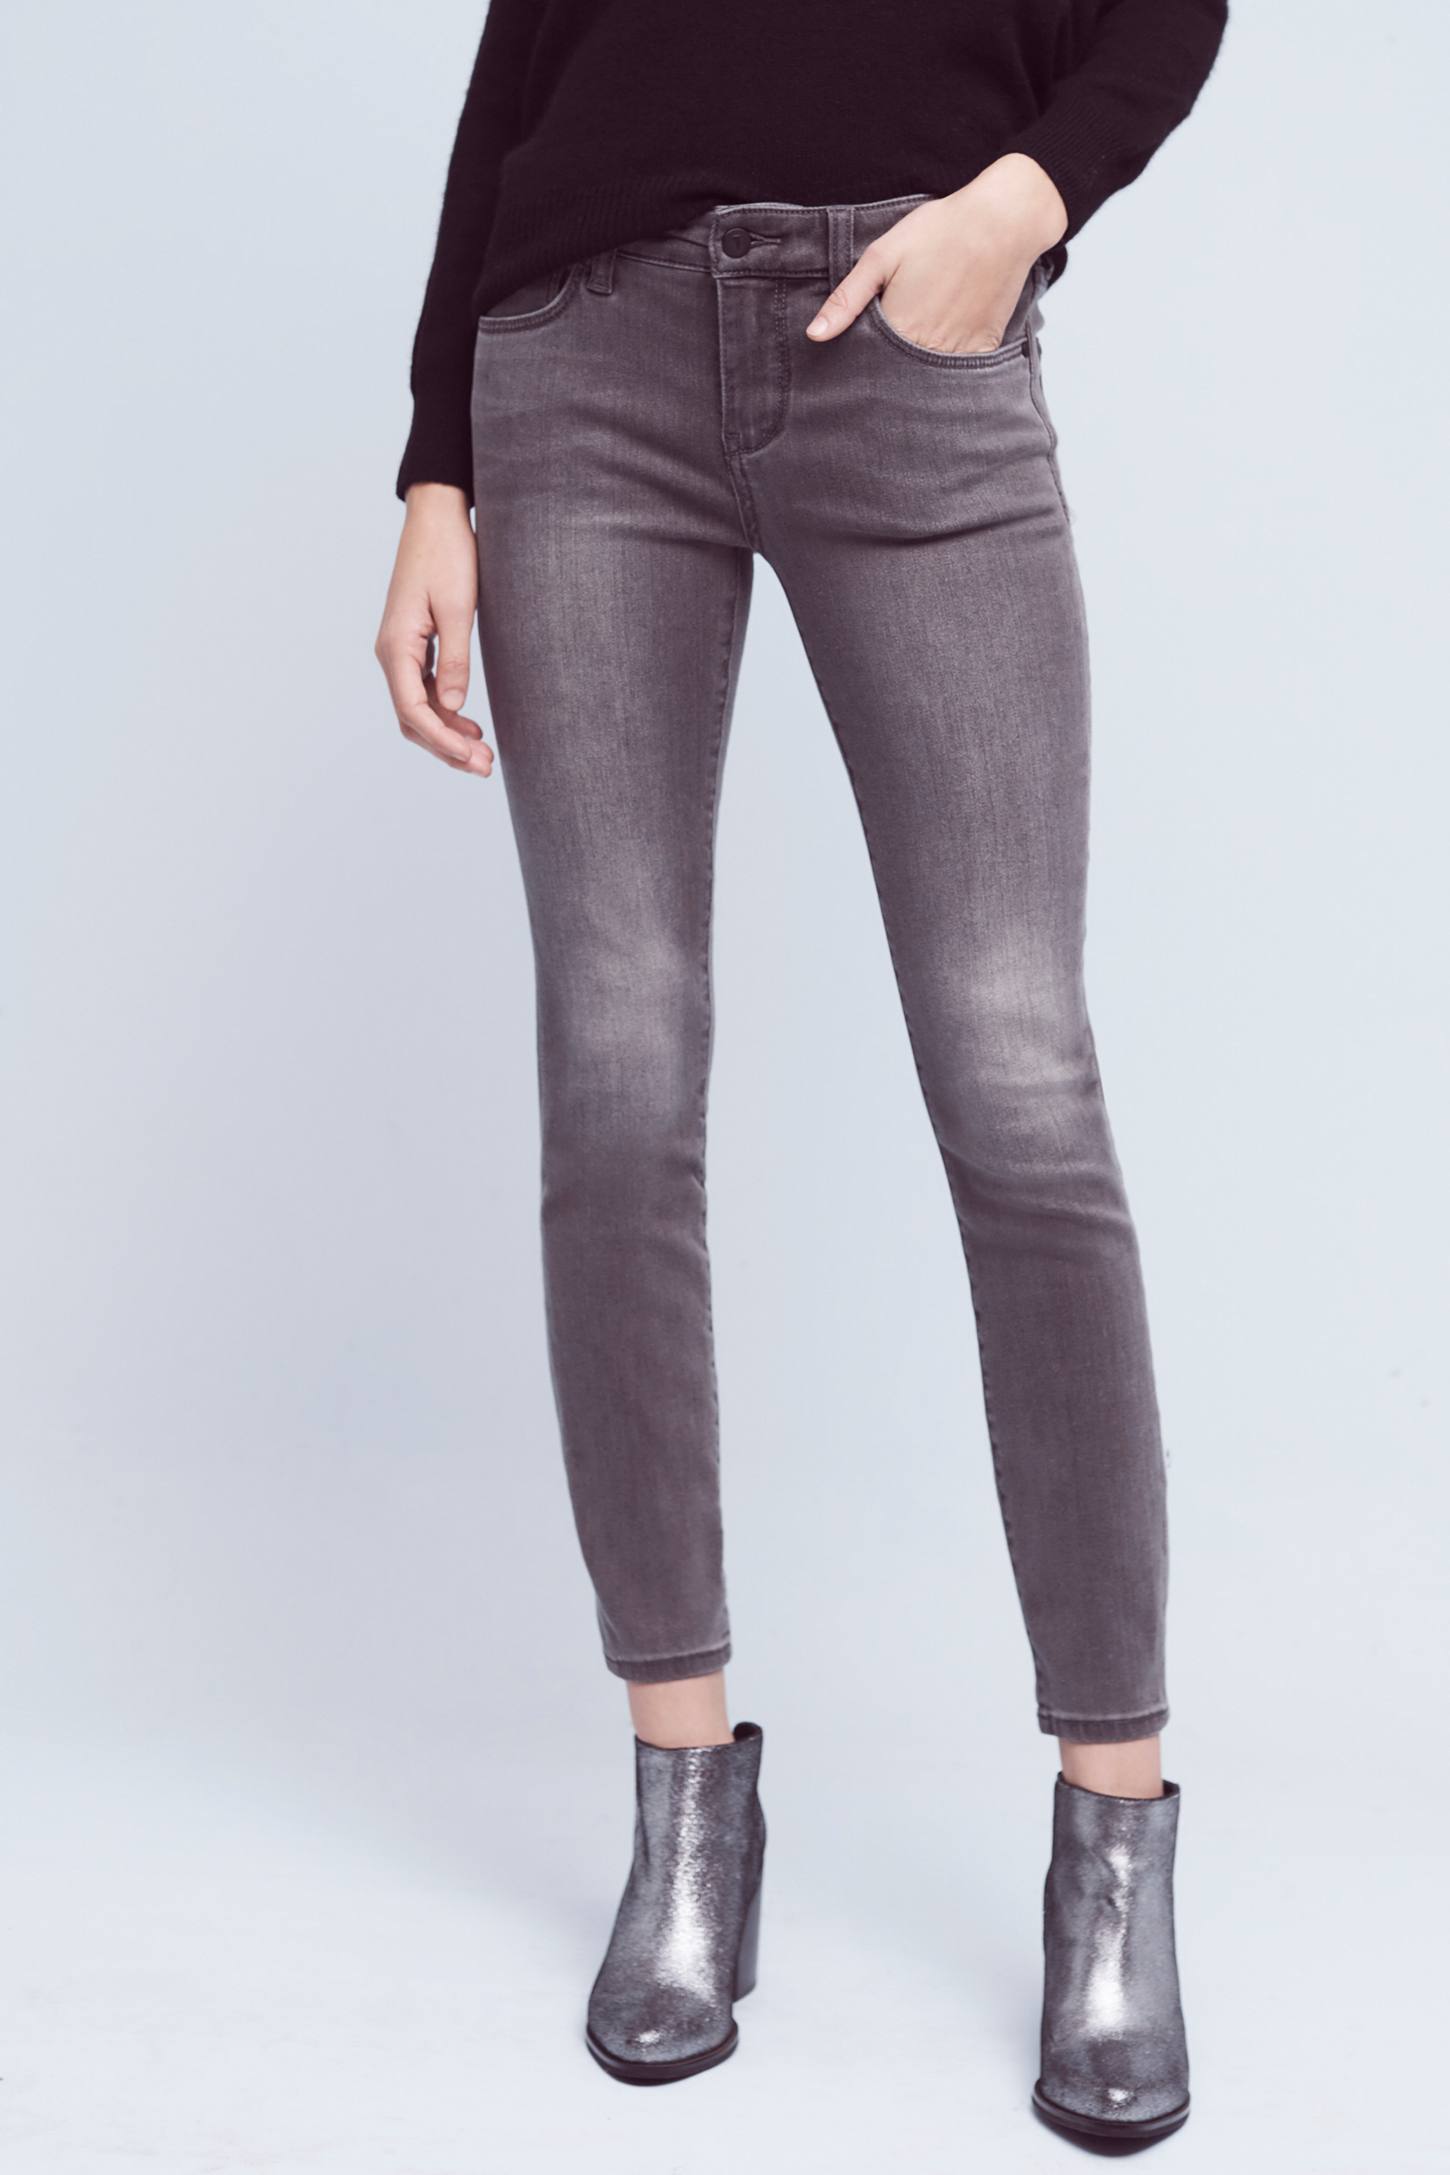 Pilcro Stet Mid-Rise Ankle Jeans | Anthropologie